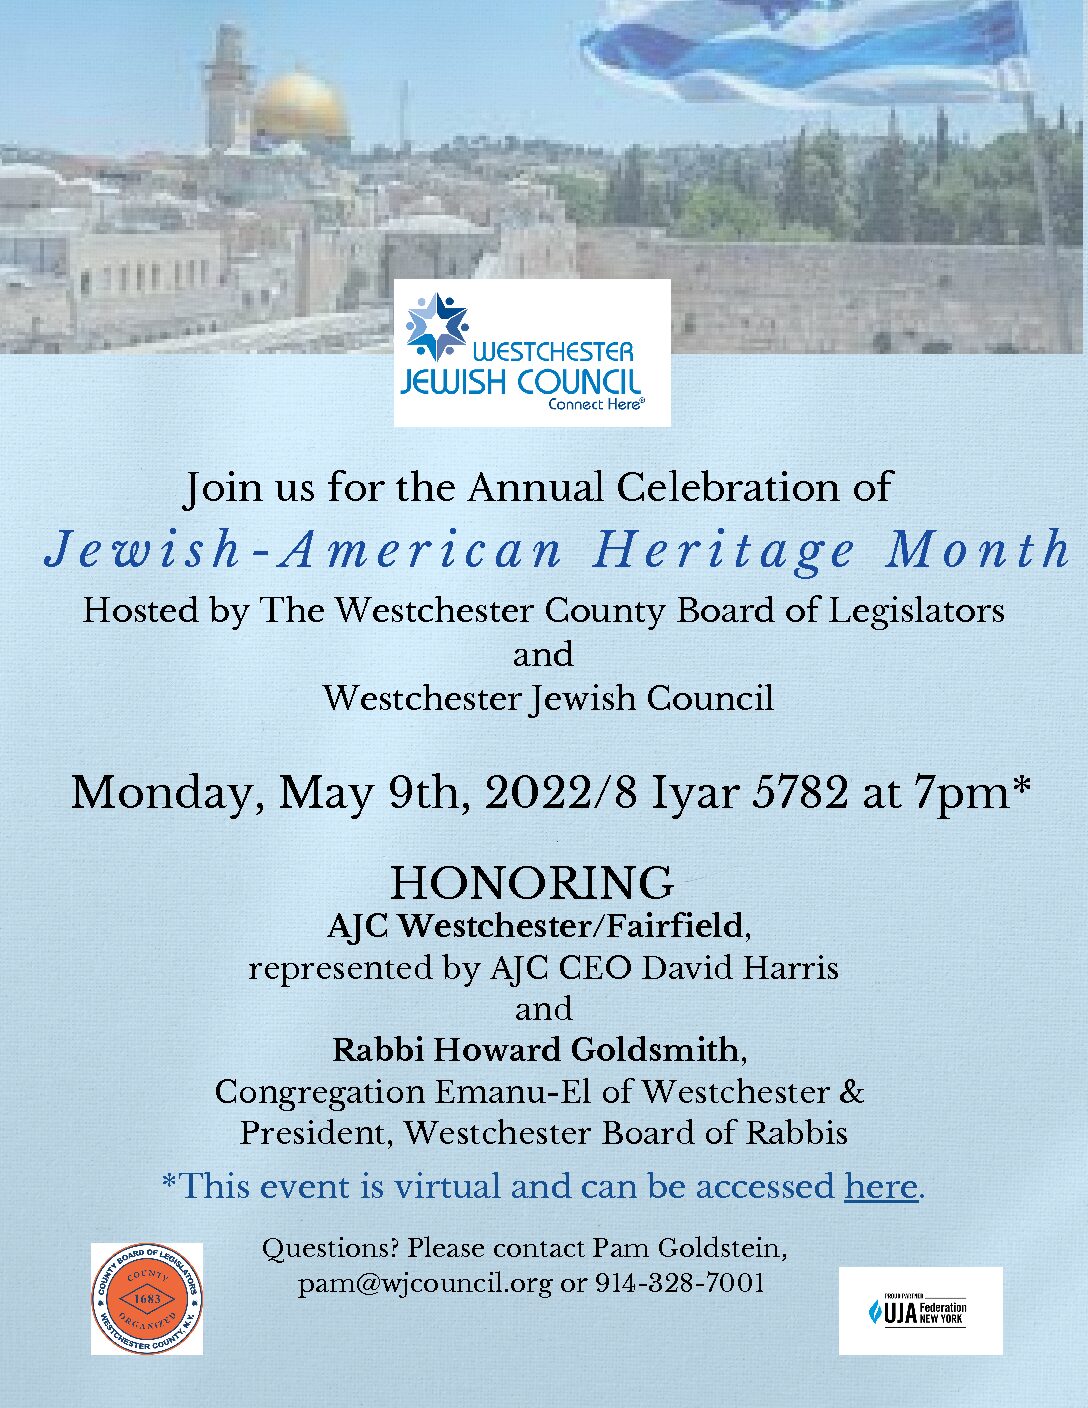 Jewish History and Heritage Month Celebration with the Westchester County Board of Legislators and Westchester Jewish Council